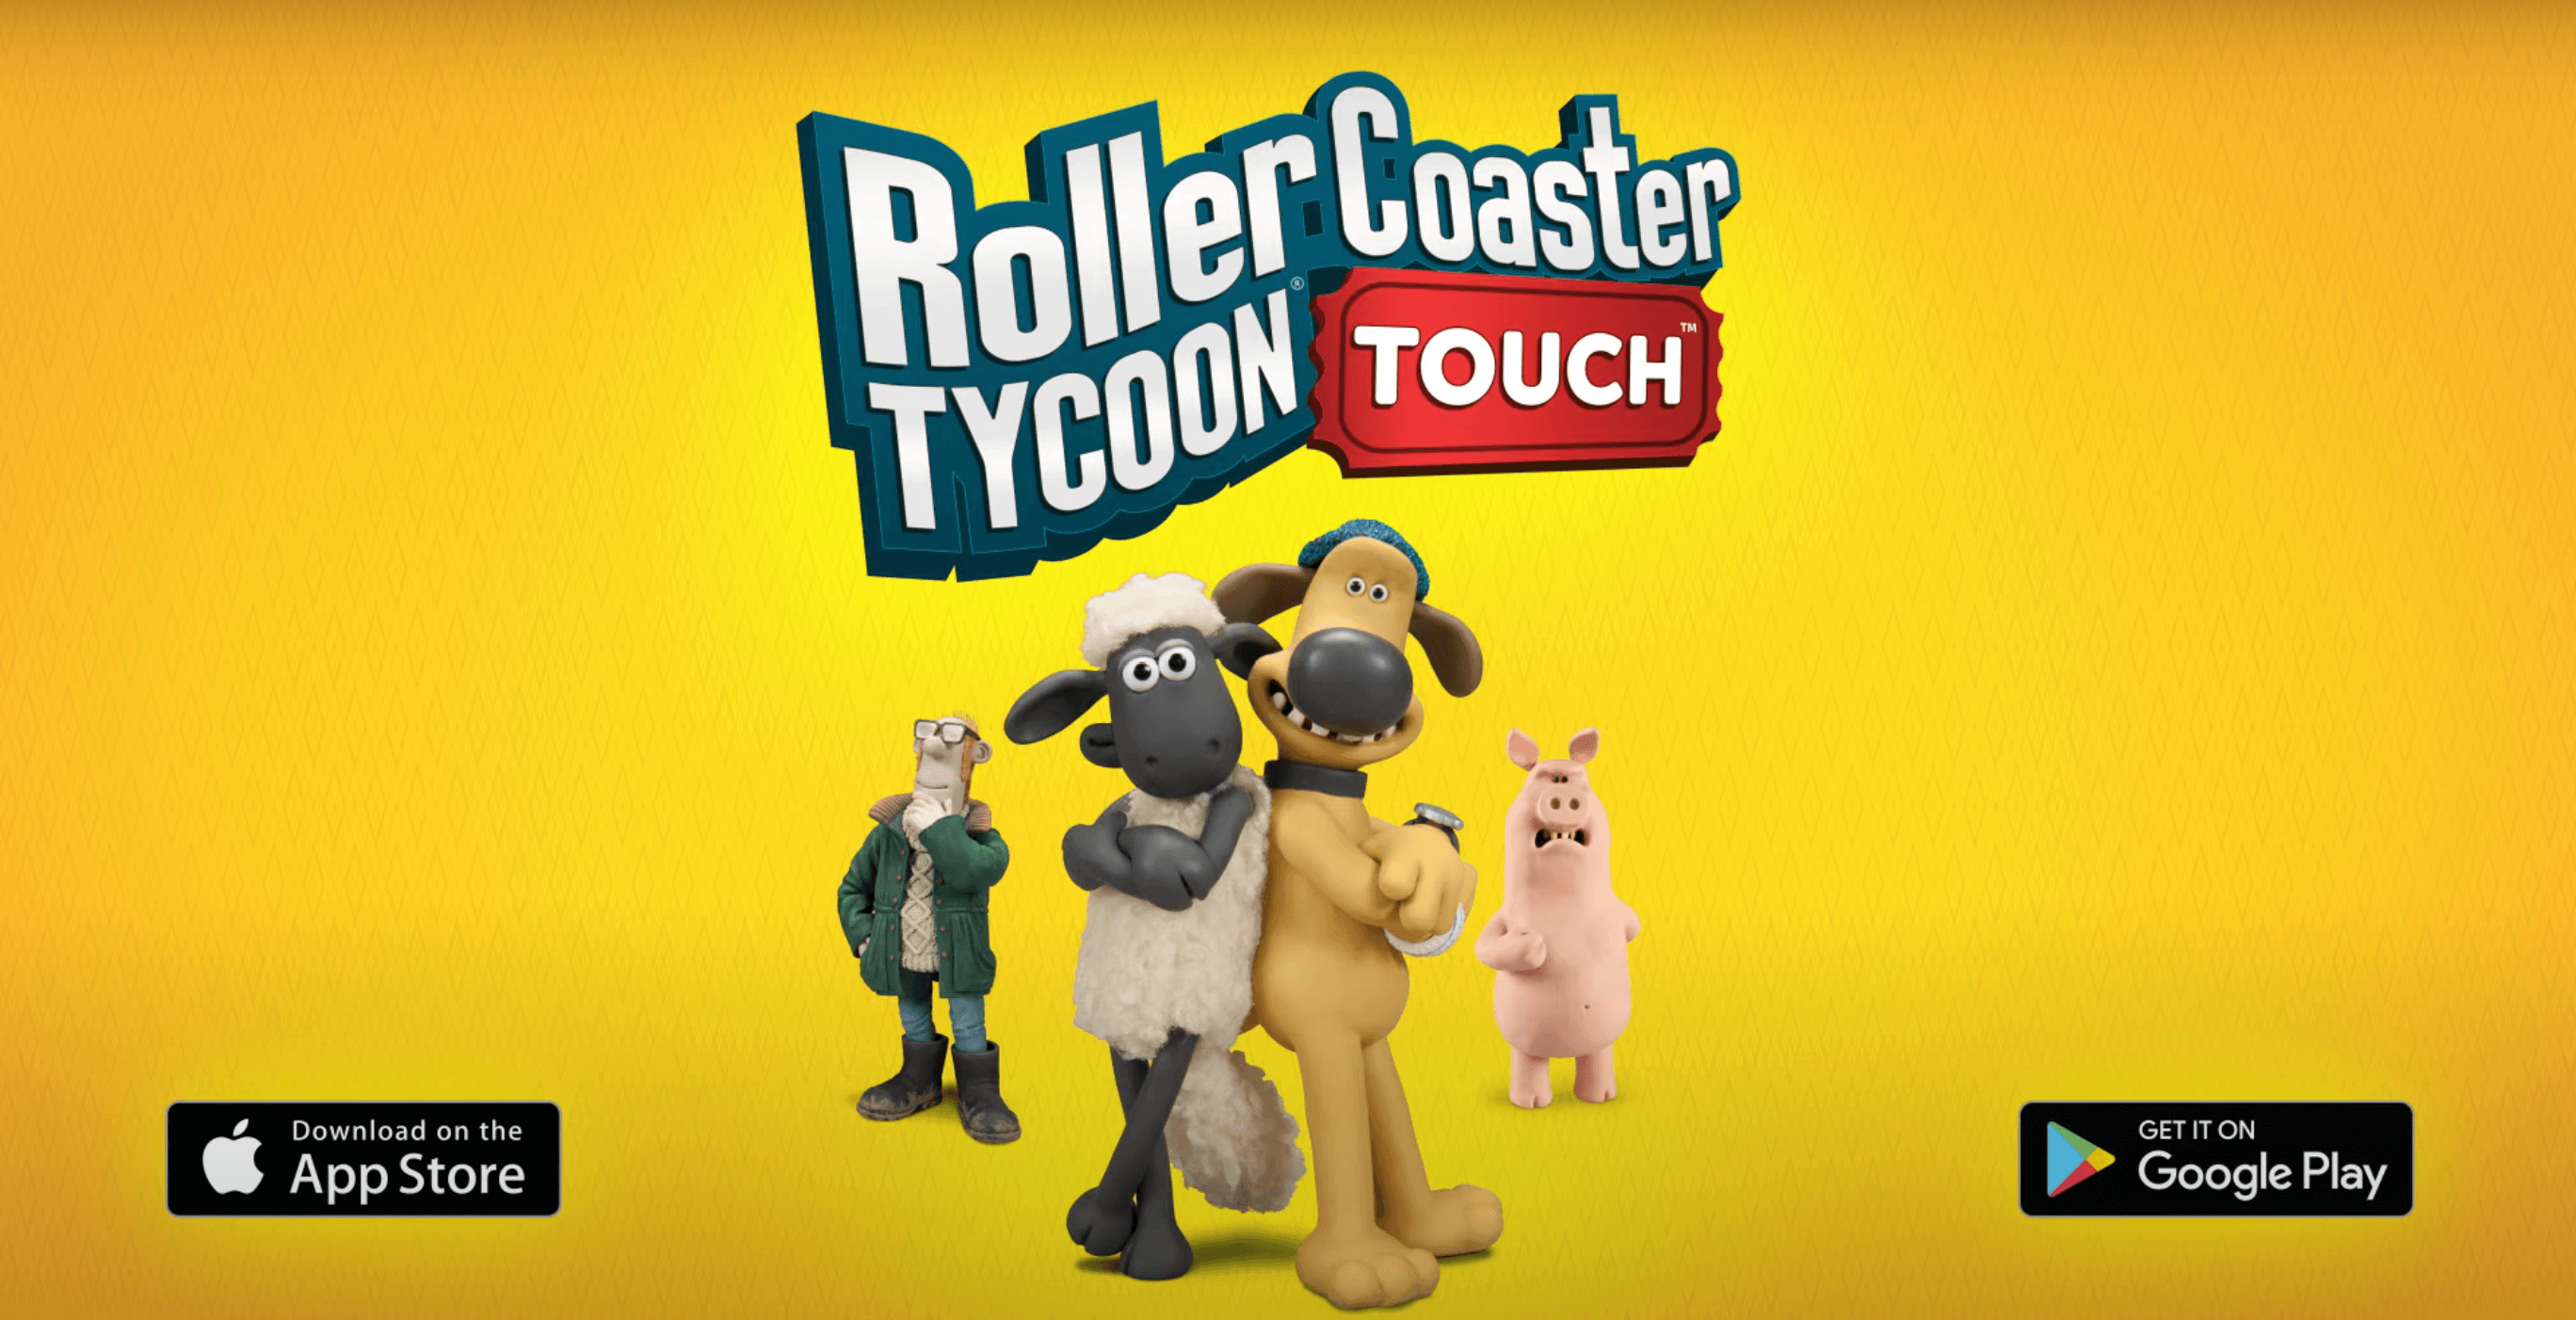 RollerCoaster Tycoon Touch: sad brother to a great game